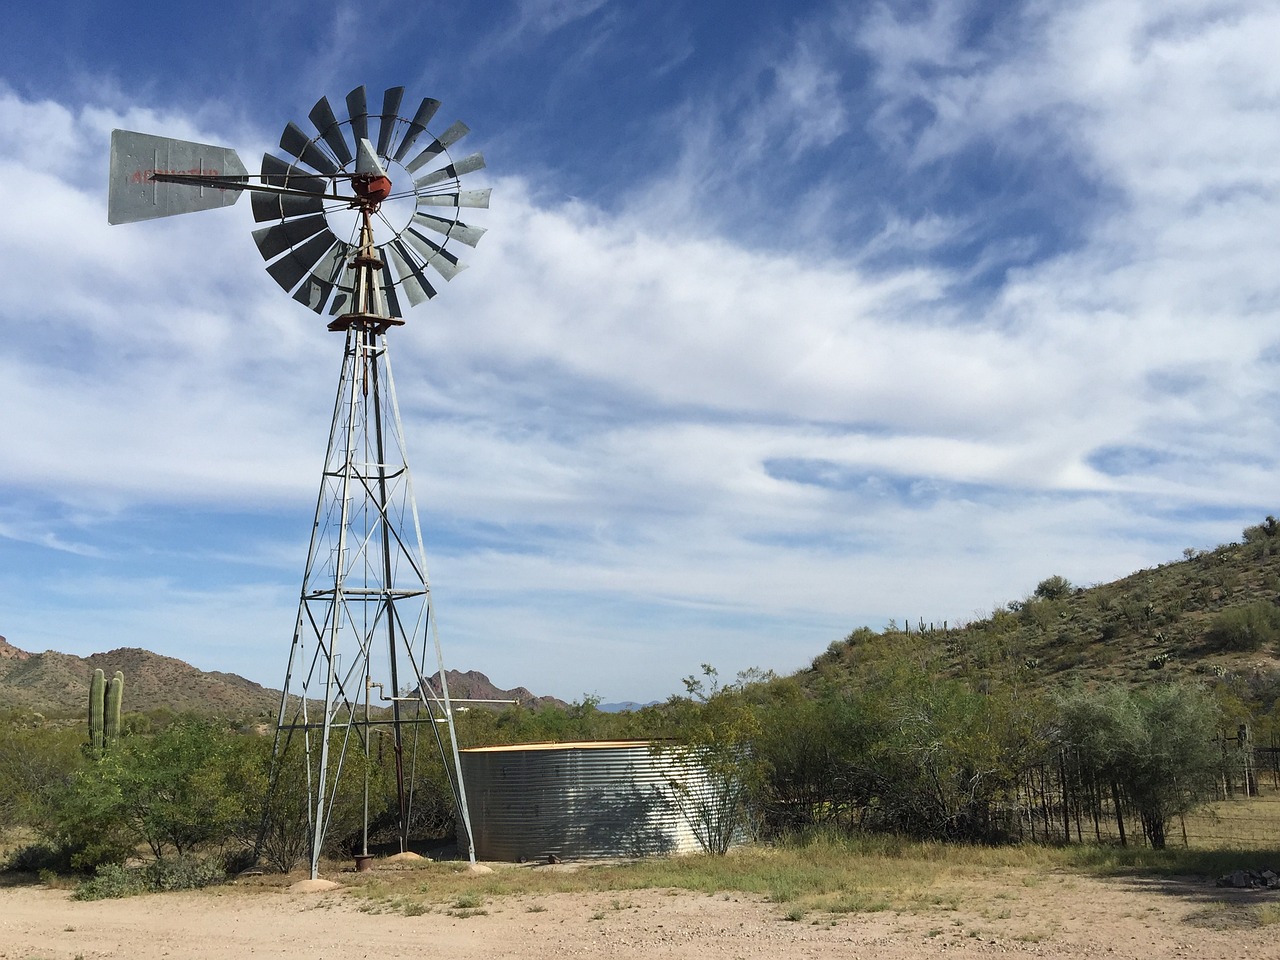 Windmill depicting rural groundwater